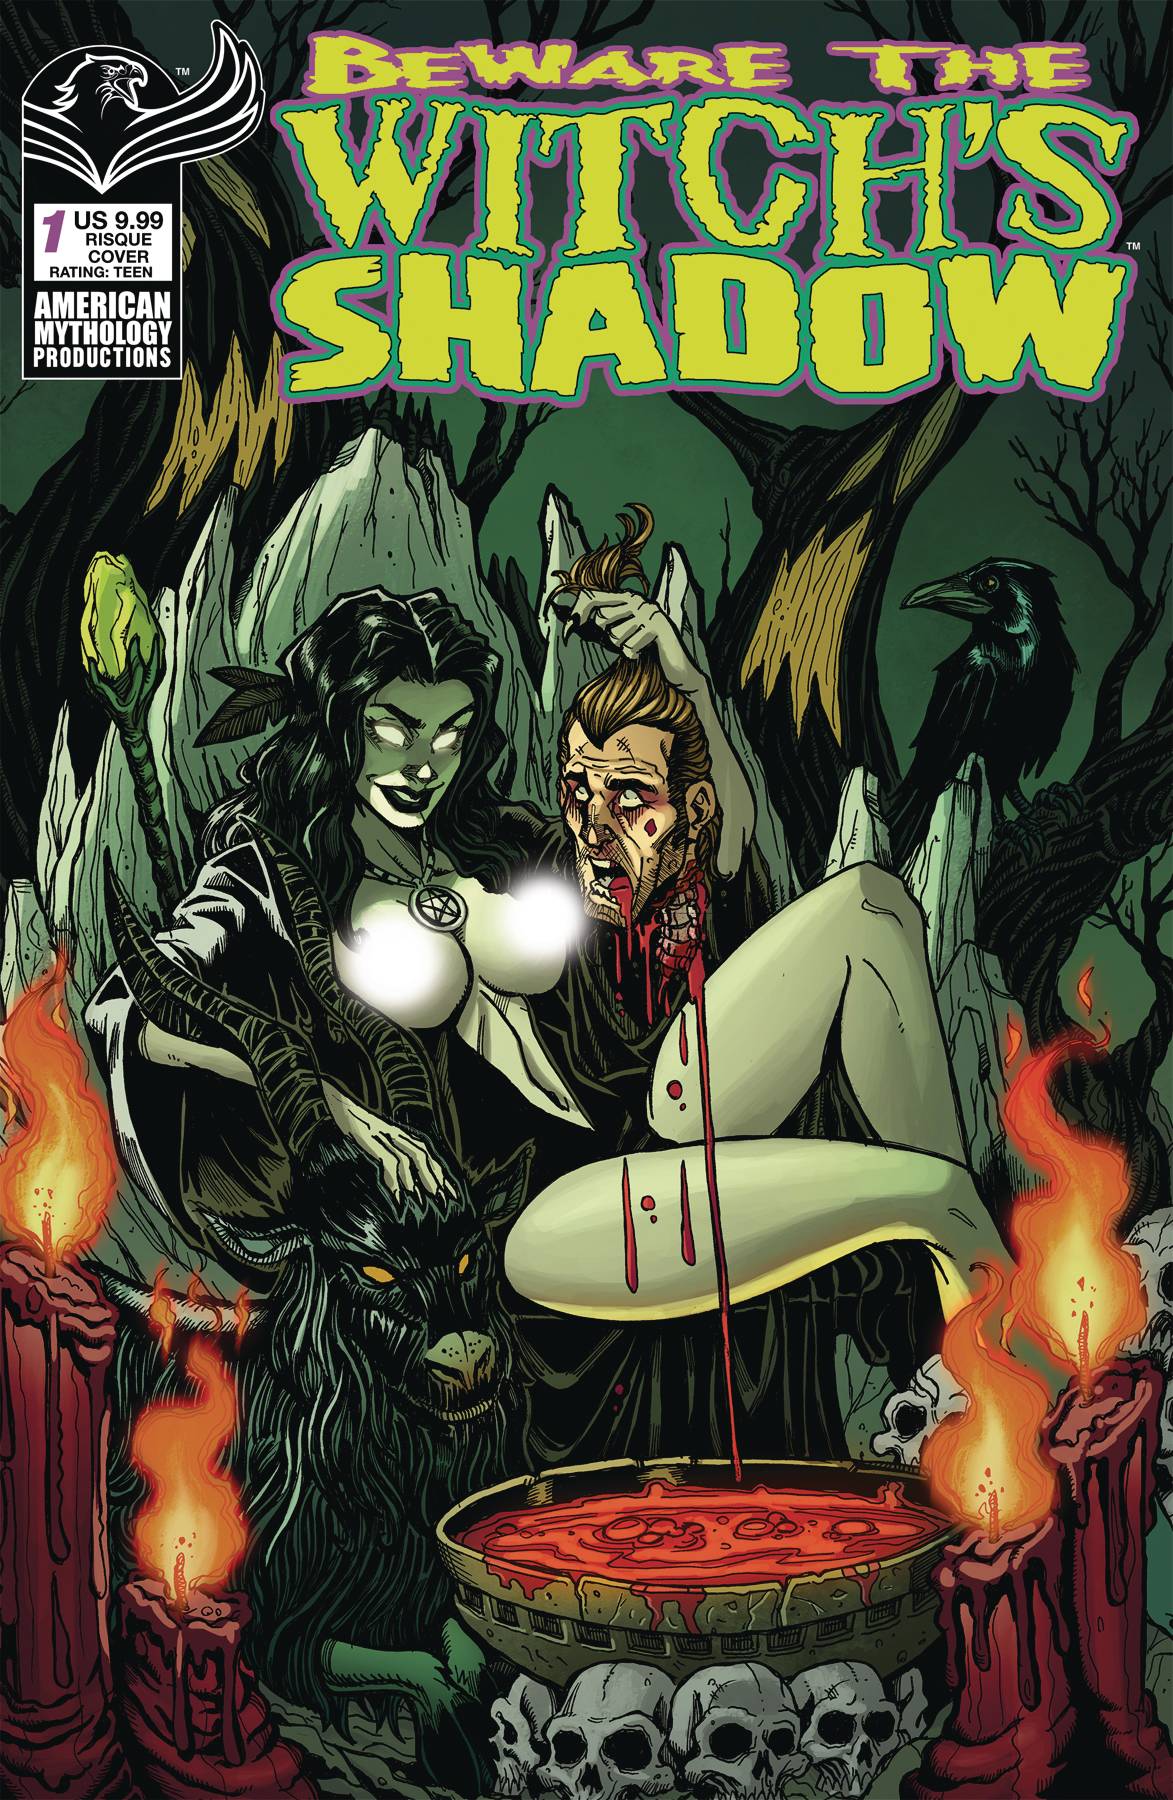 BEWARE THE WITCHS SHADOW #1 CVR C RISQUE (MR)